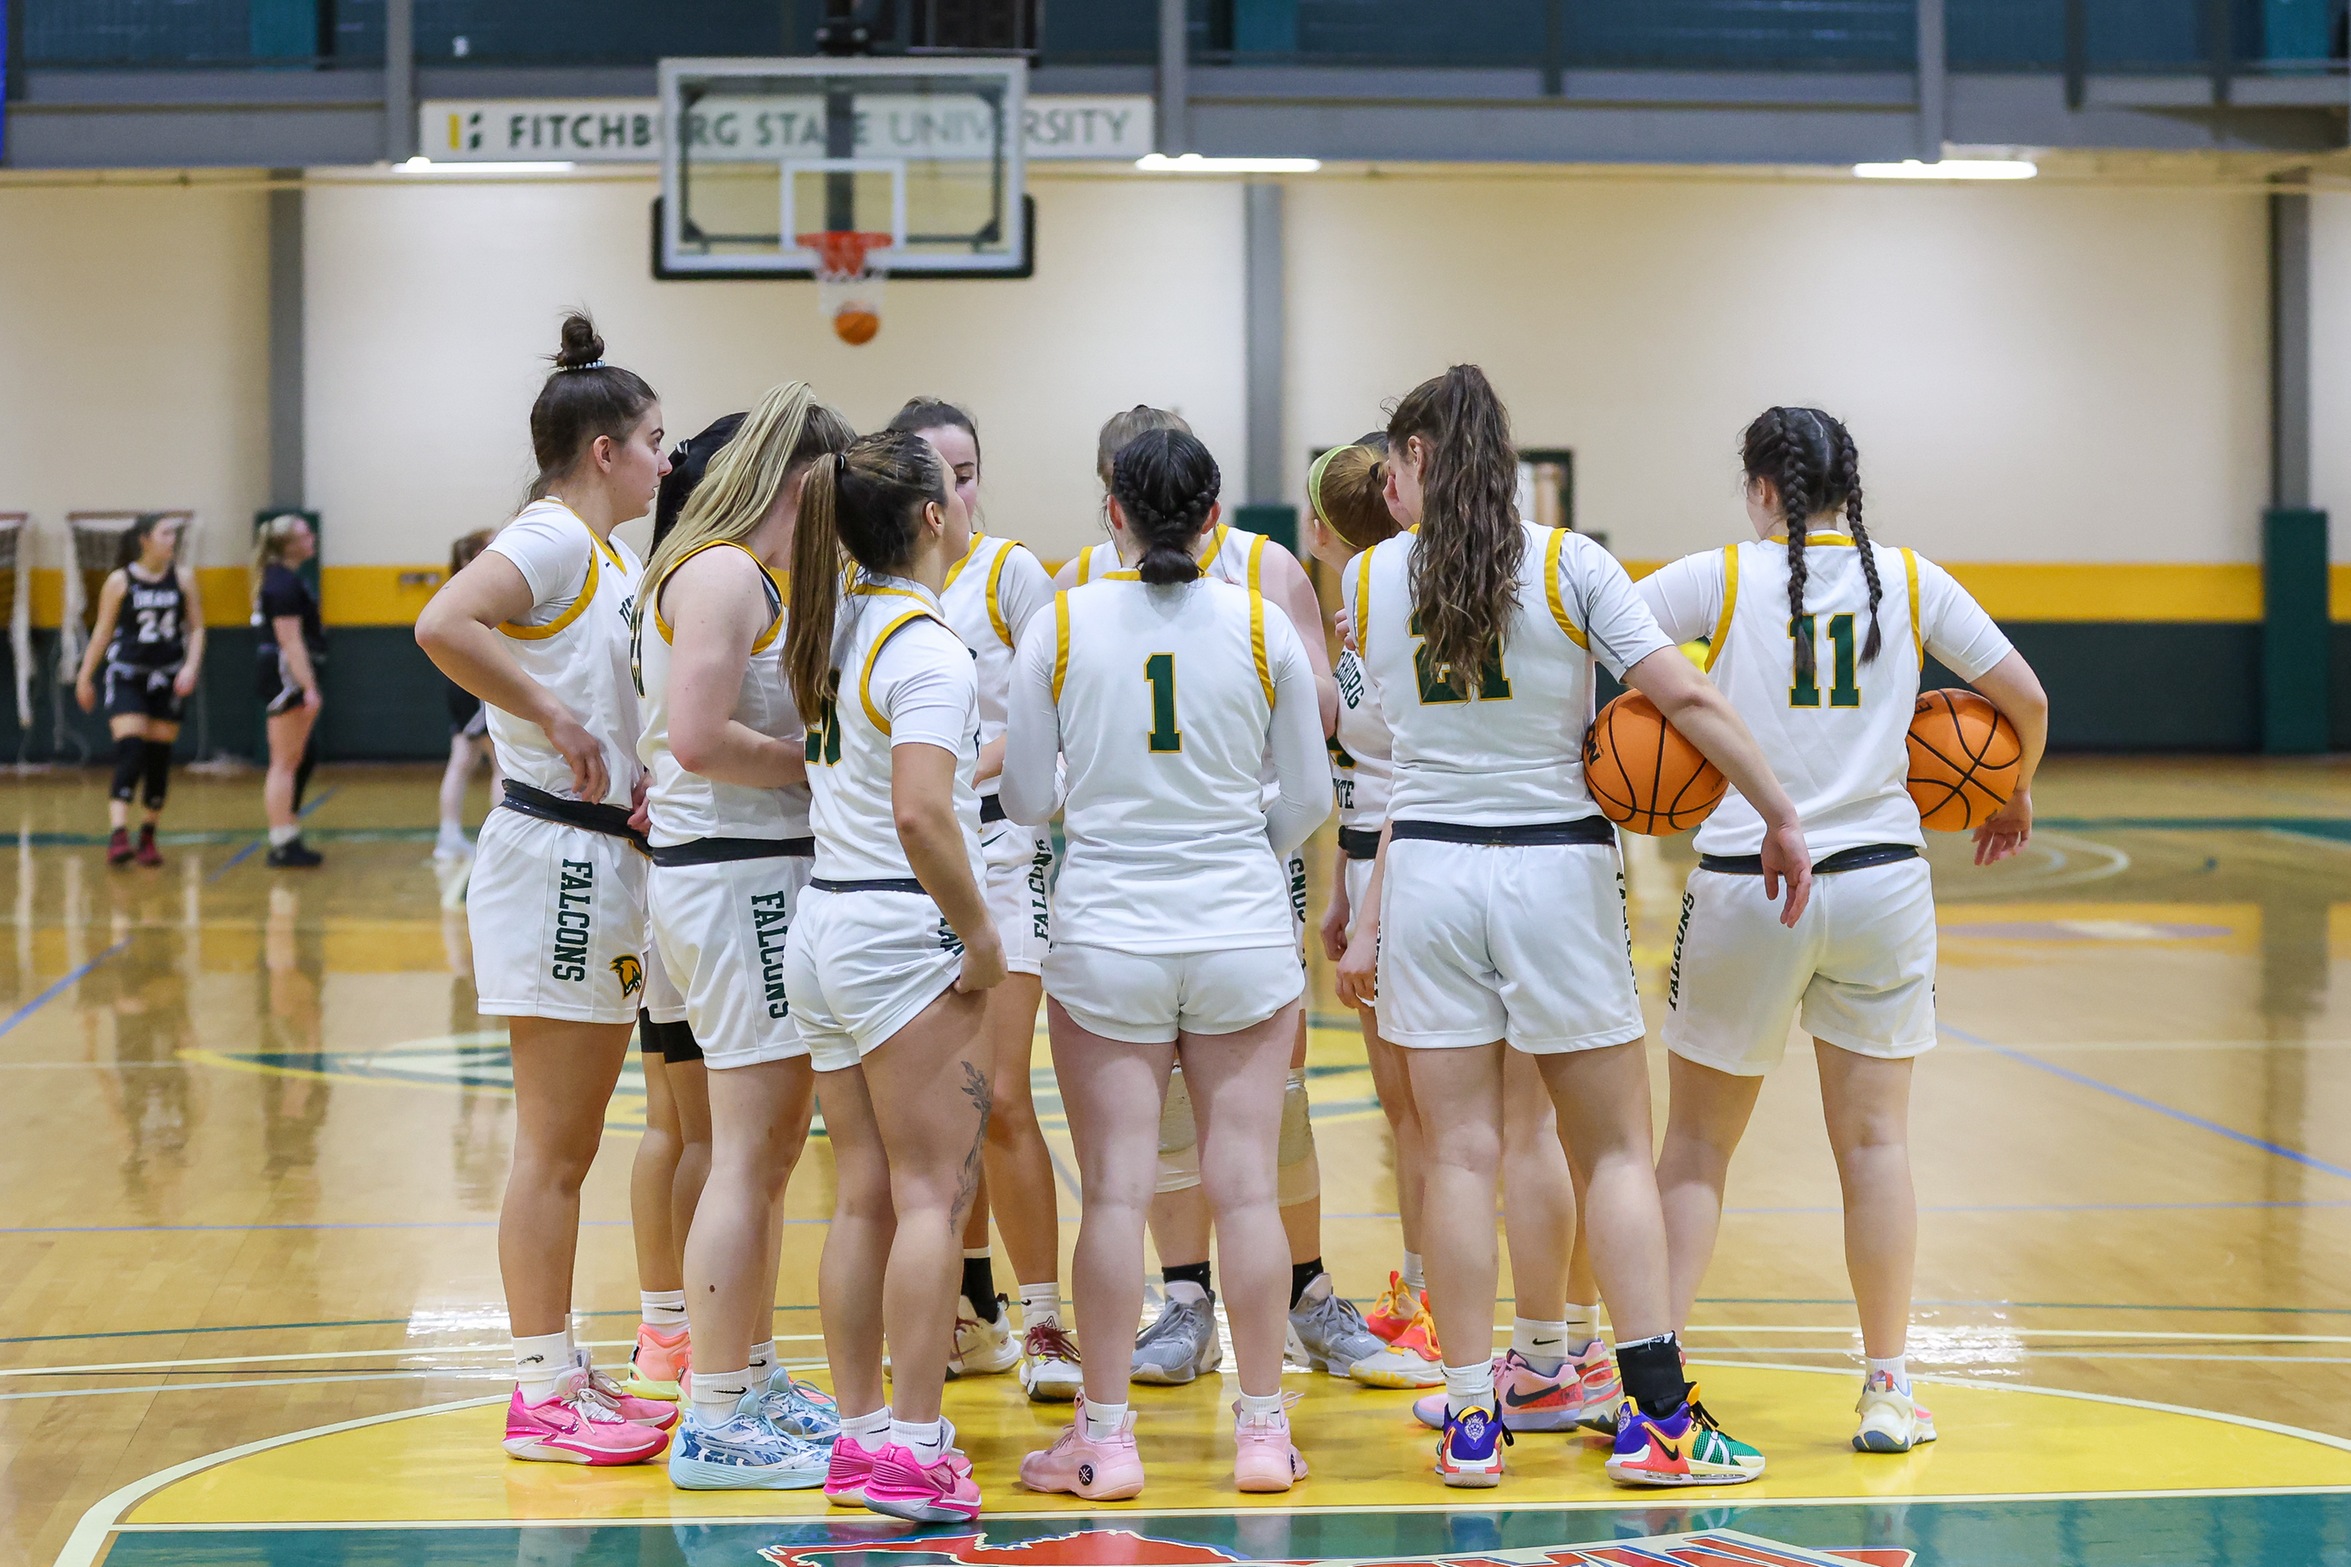 Women's Basketball Falls to Westfield in MASCAC Quarterfinals